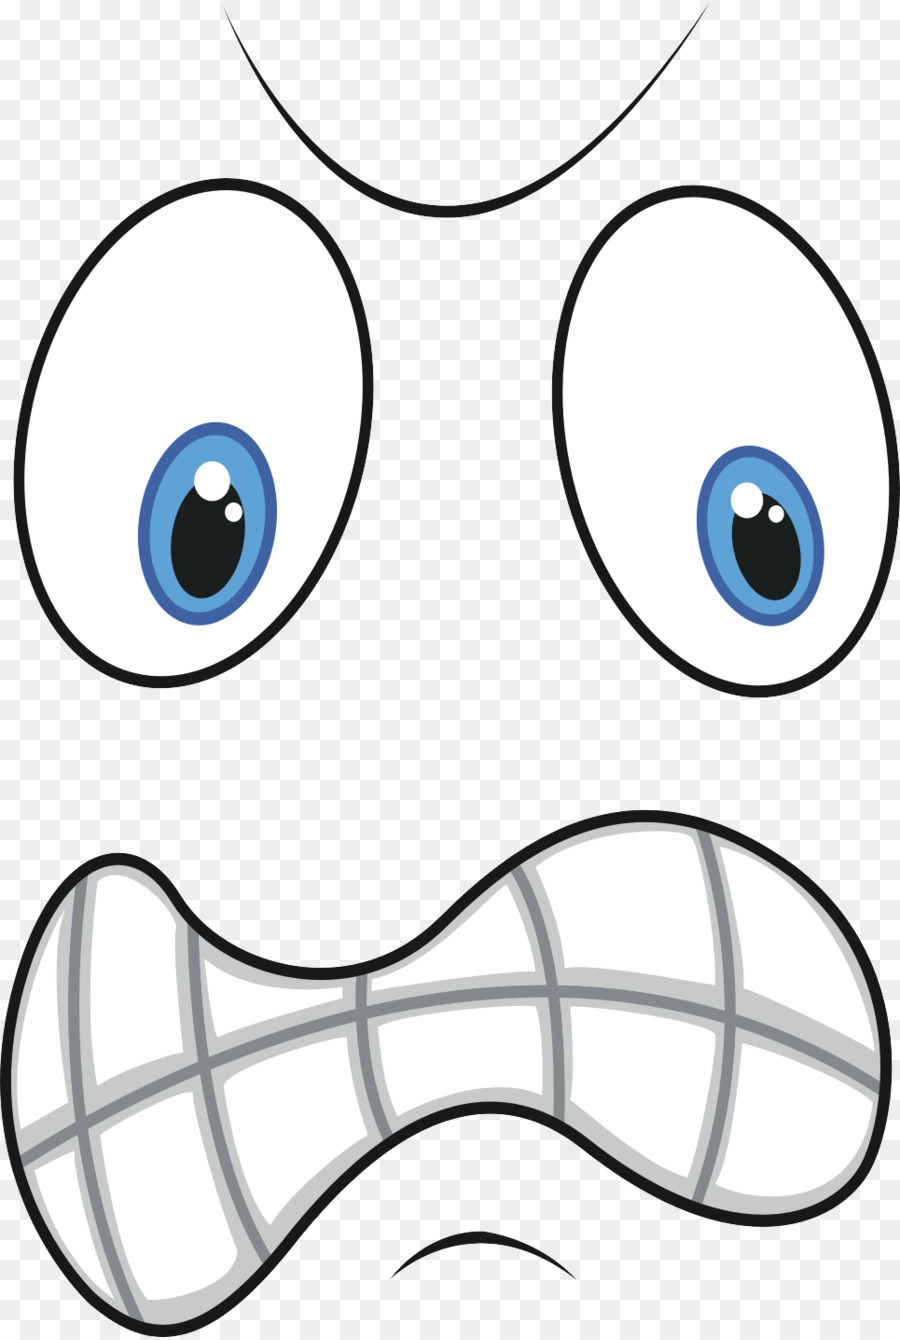 Face Cartoon png download - 1301*1600 - Free Transparent Grouchy